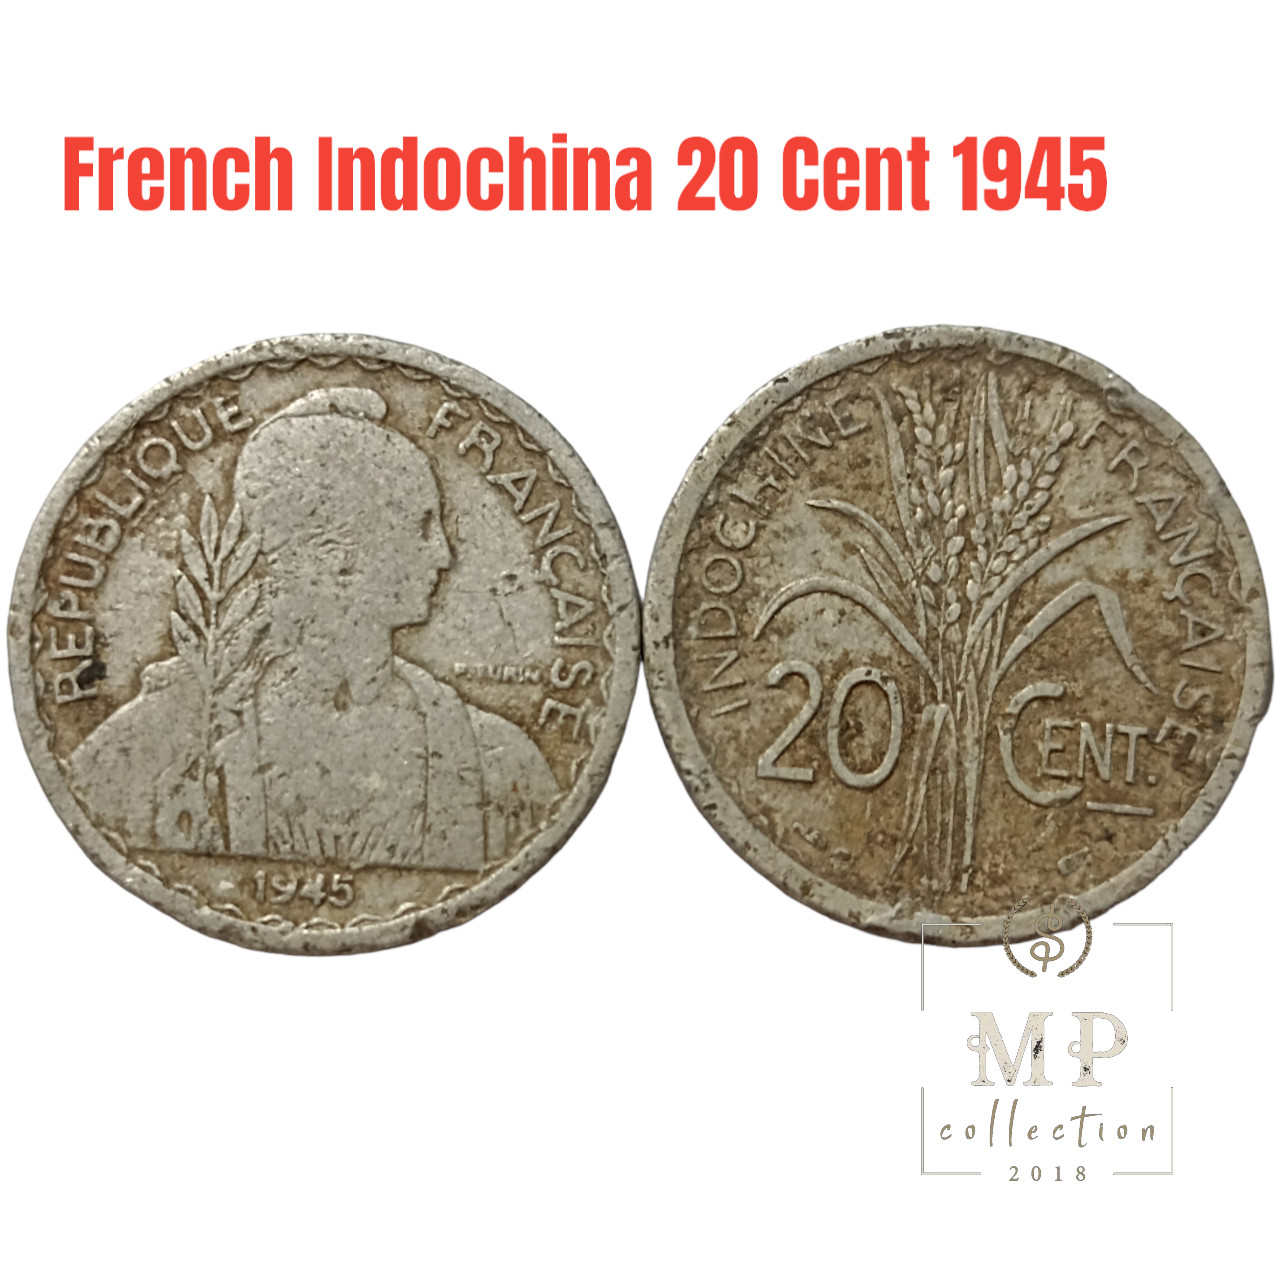 Đồng xu French Indochina 20 Cent 1945